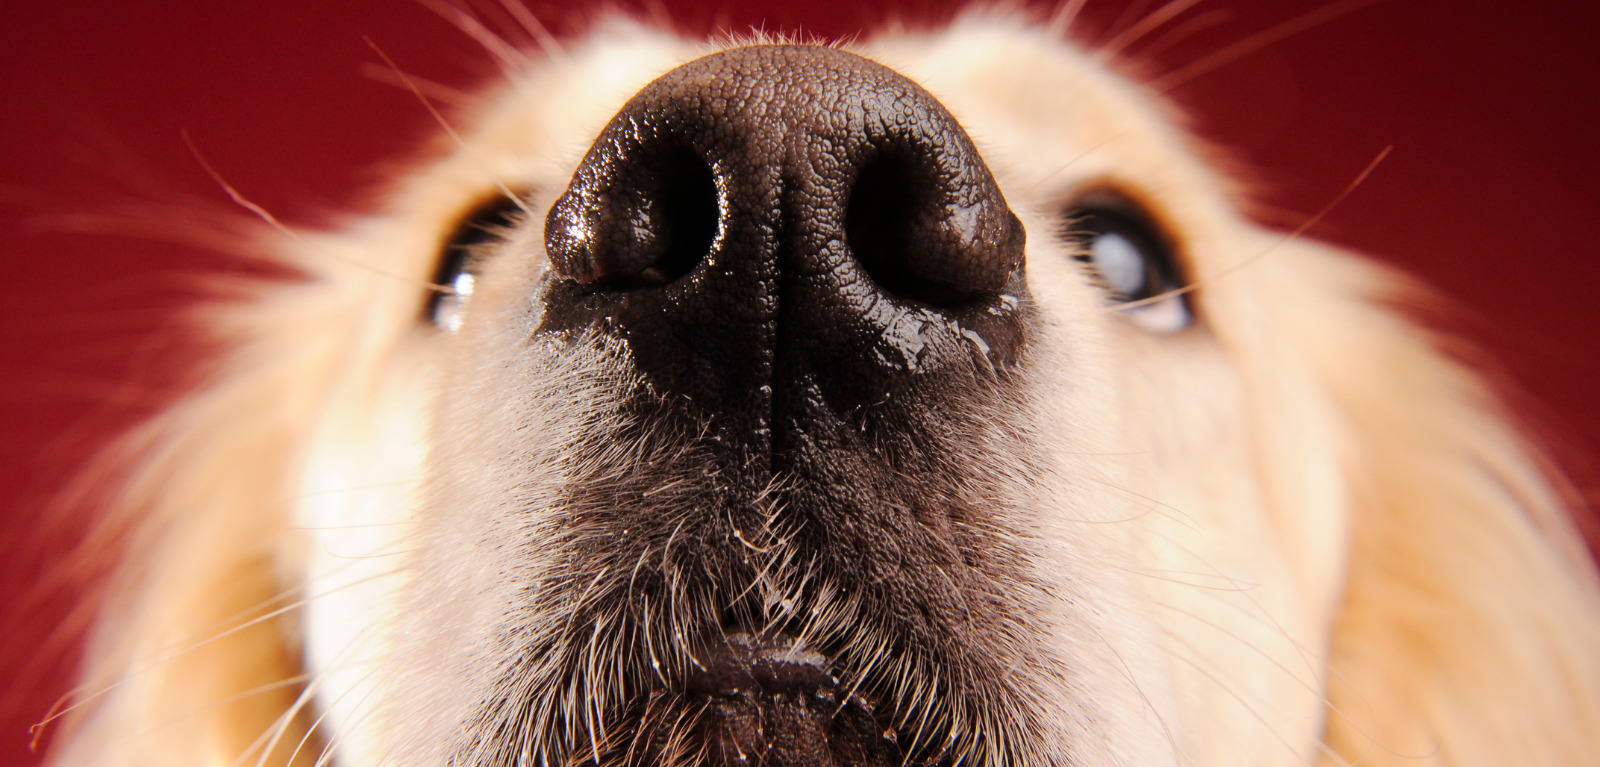 Discover: Dogs | Can Dogs Predict Epileptic Seizures?